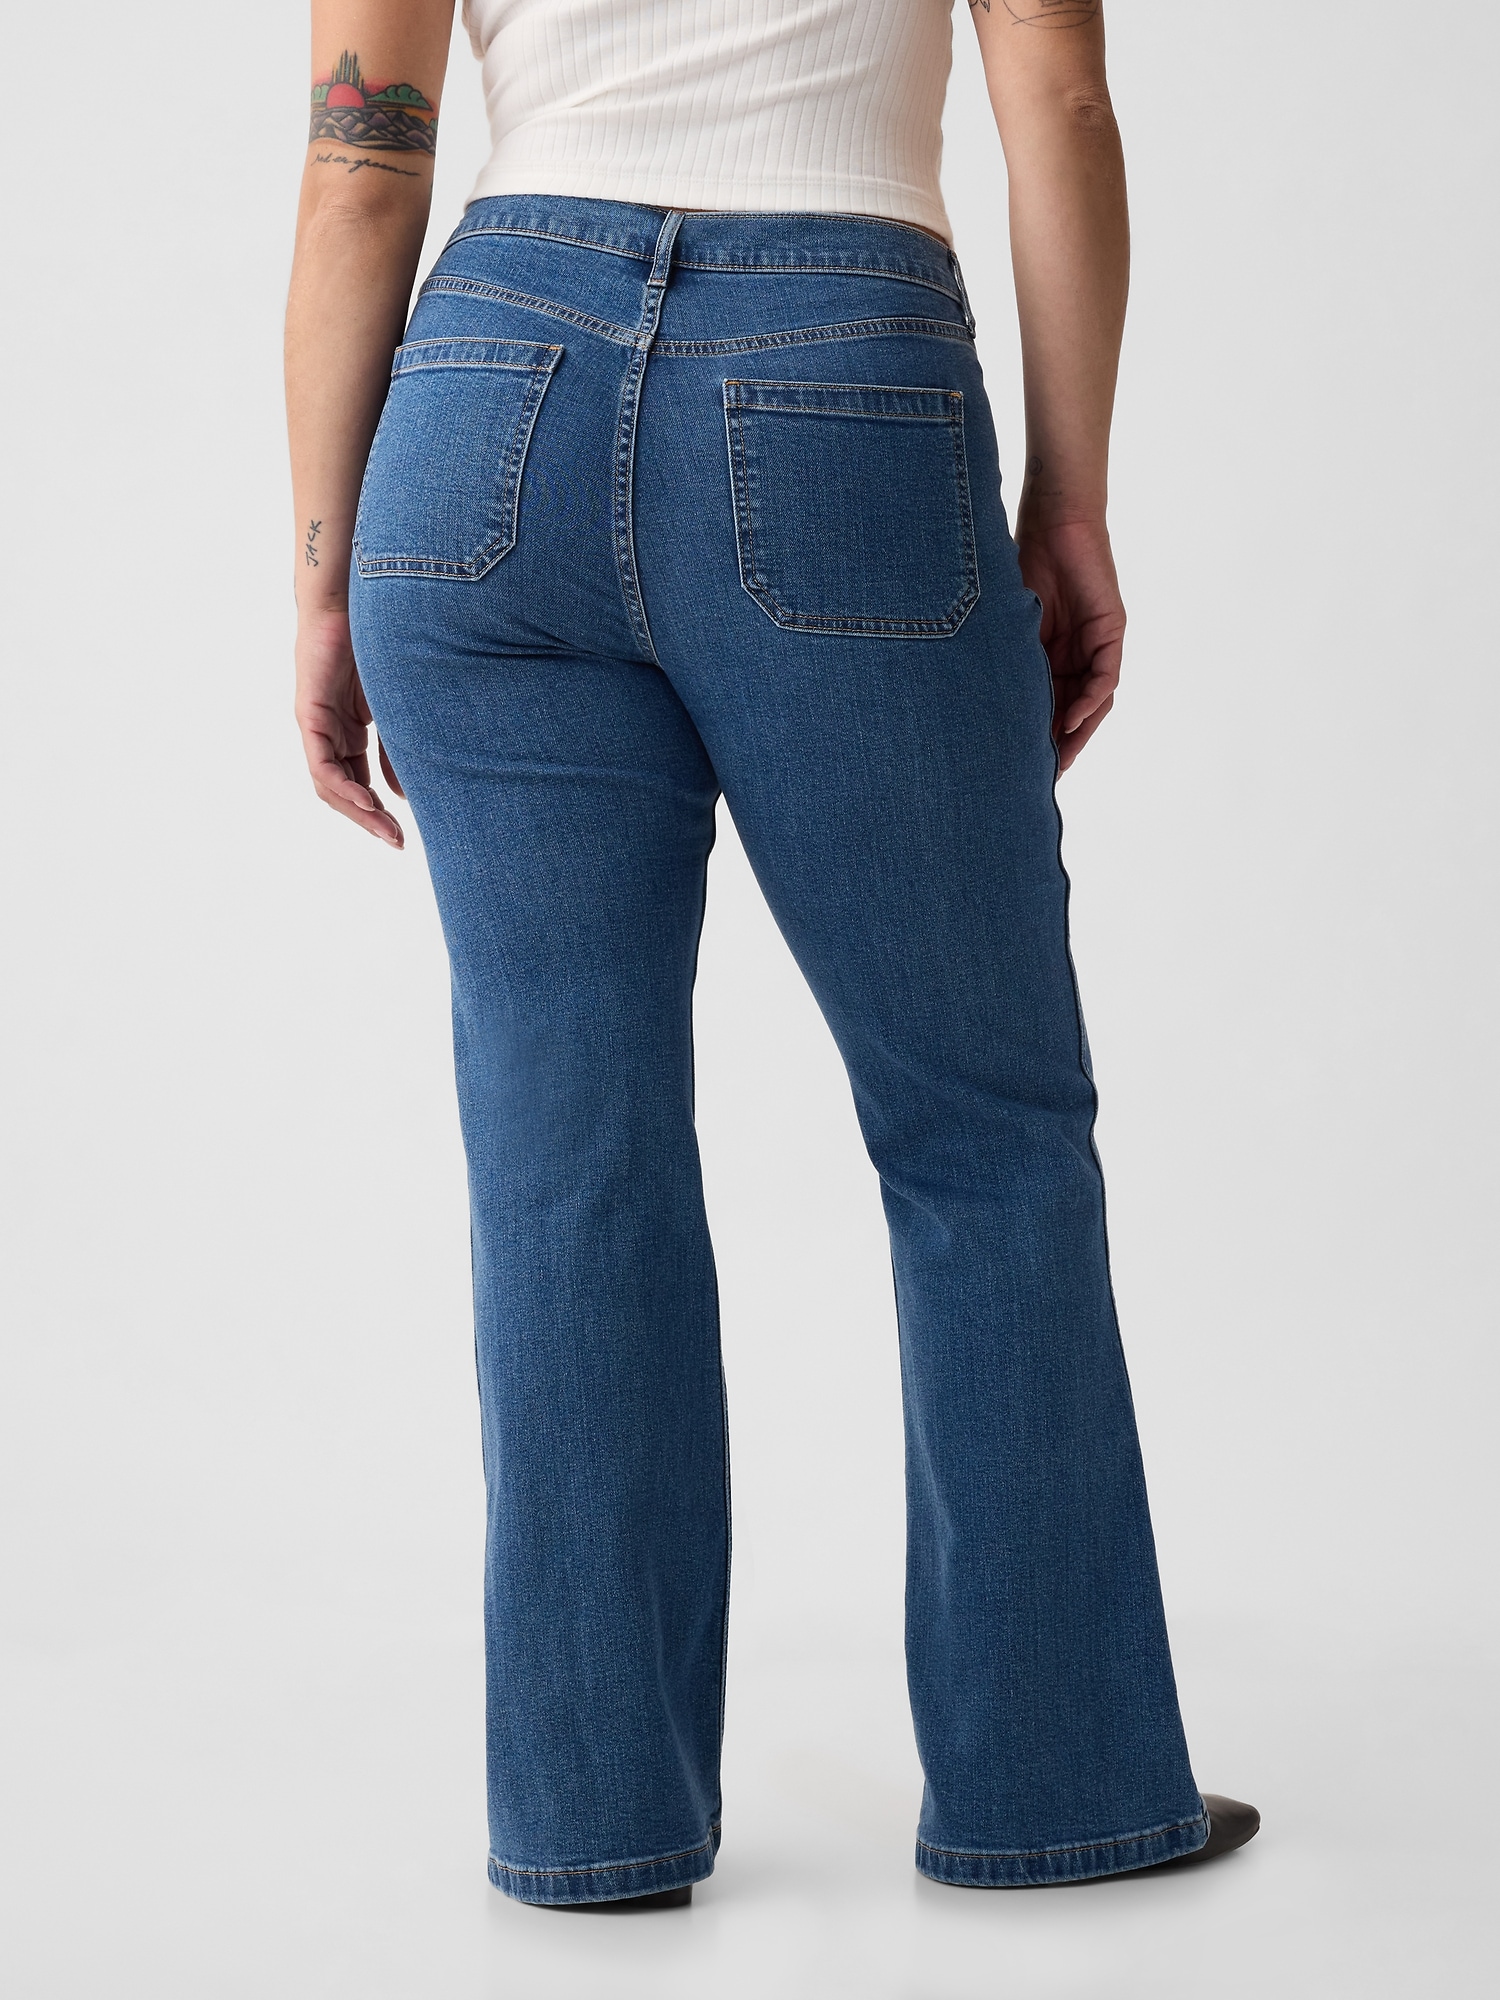 High-Waisted Cotton Flare Pants with 4 Pockets